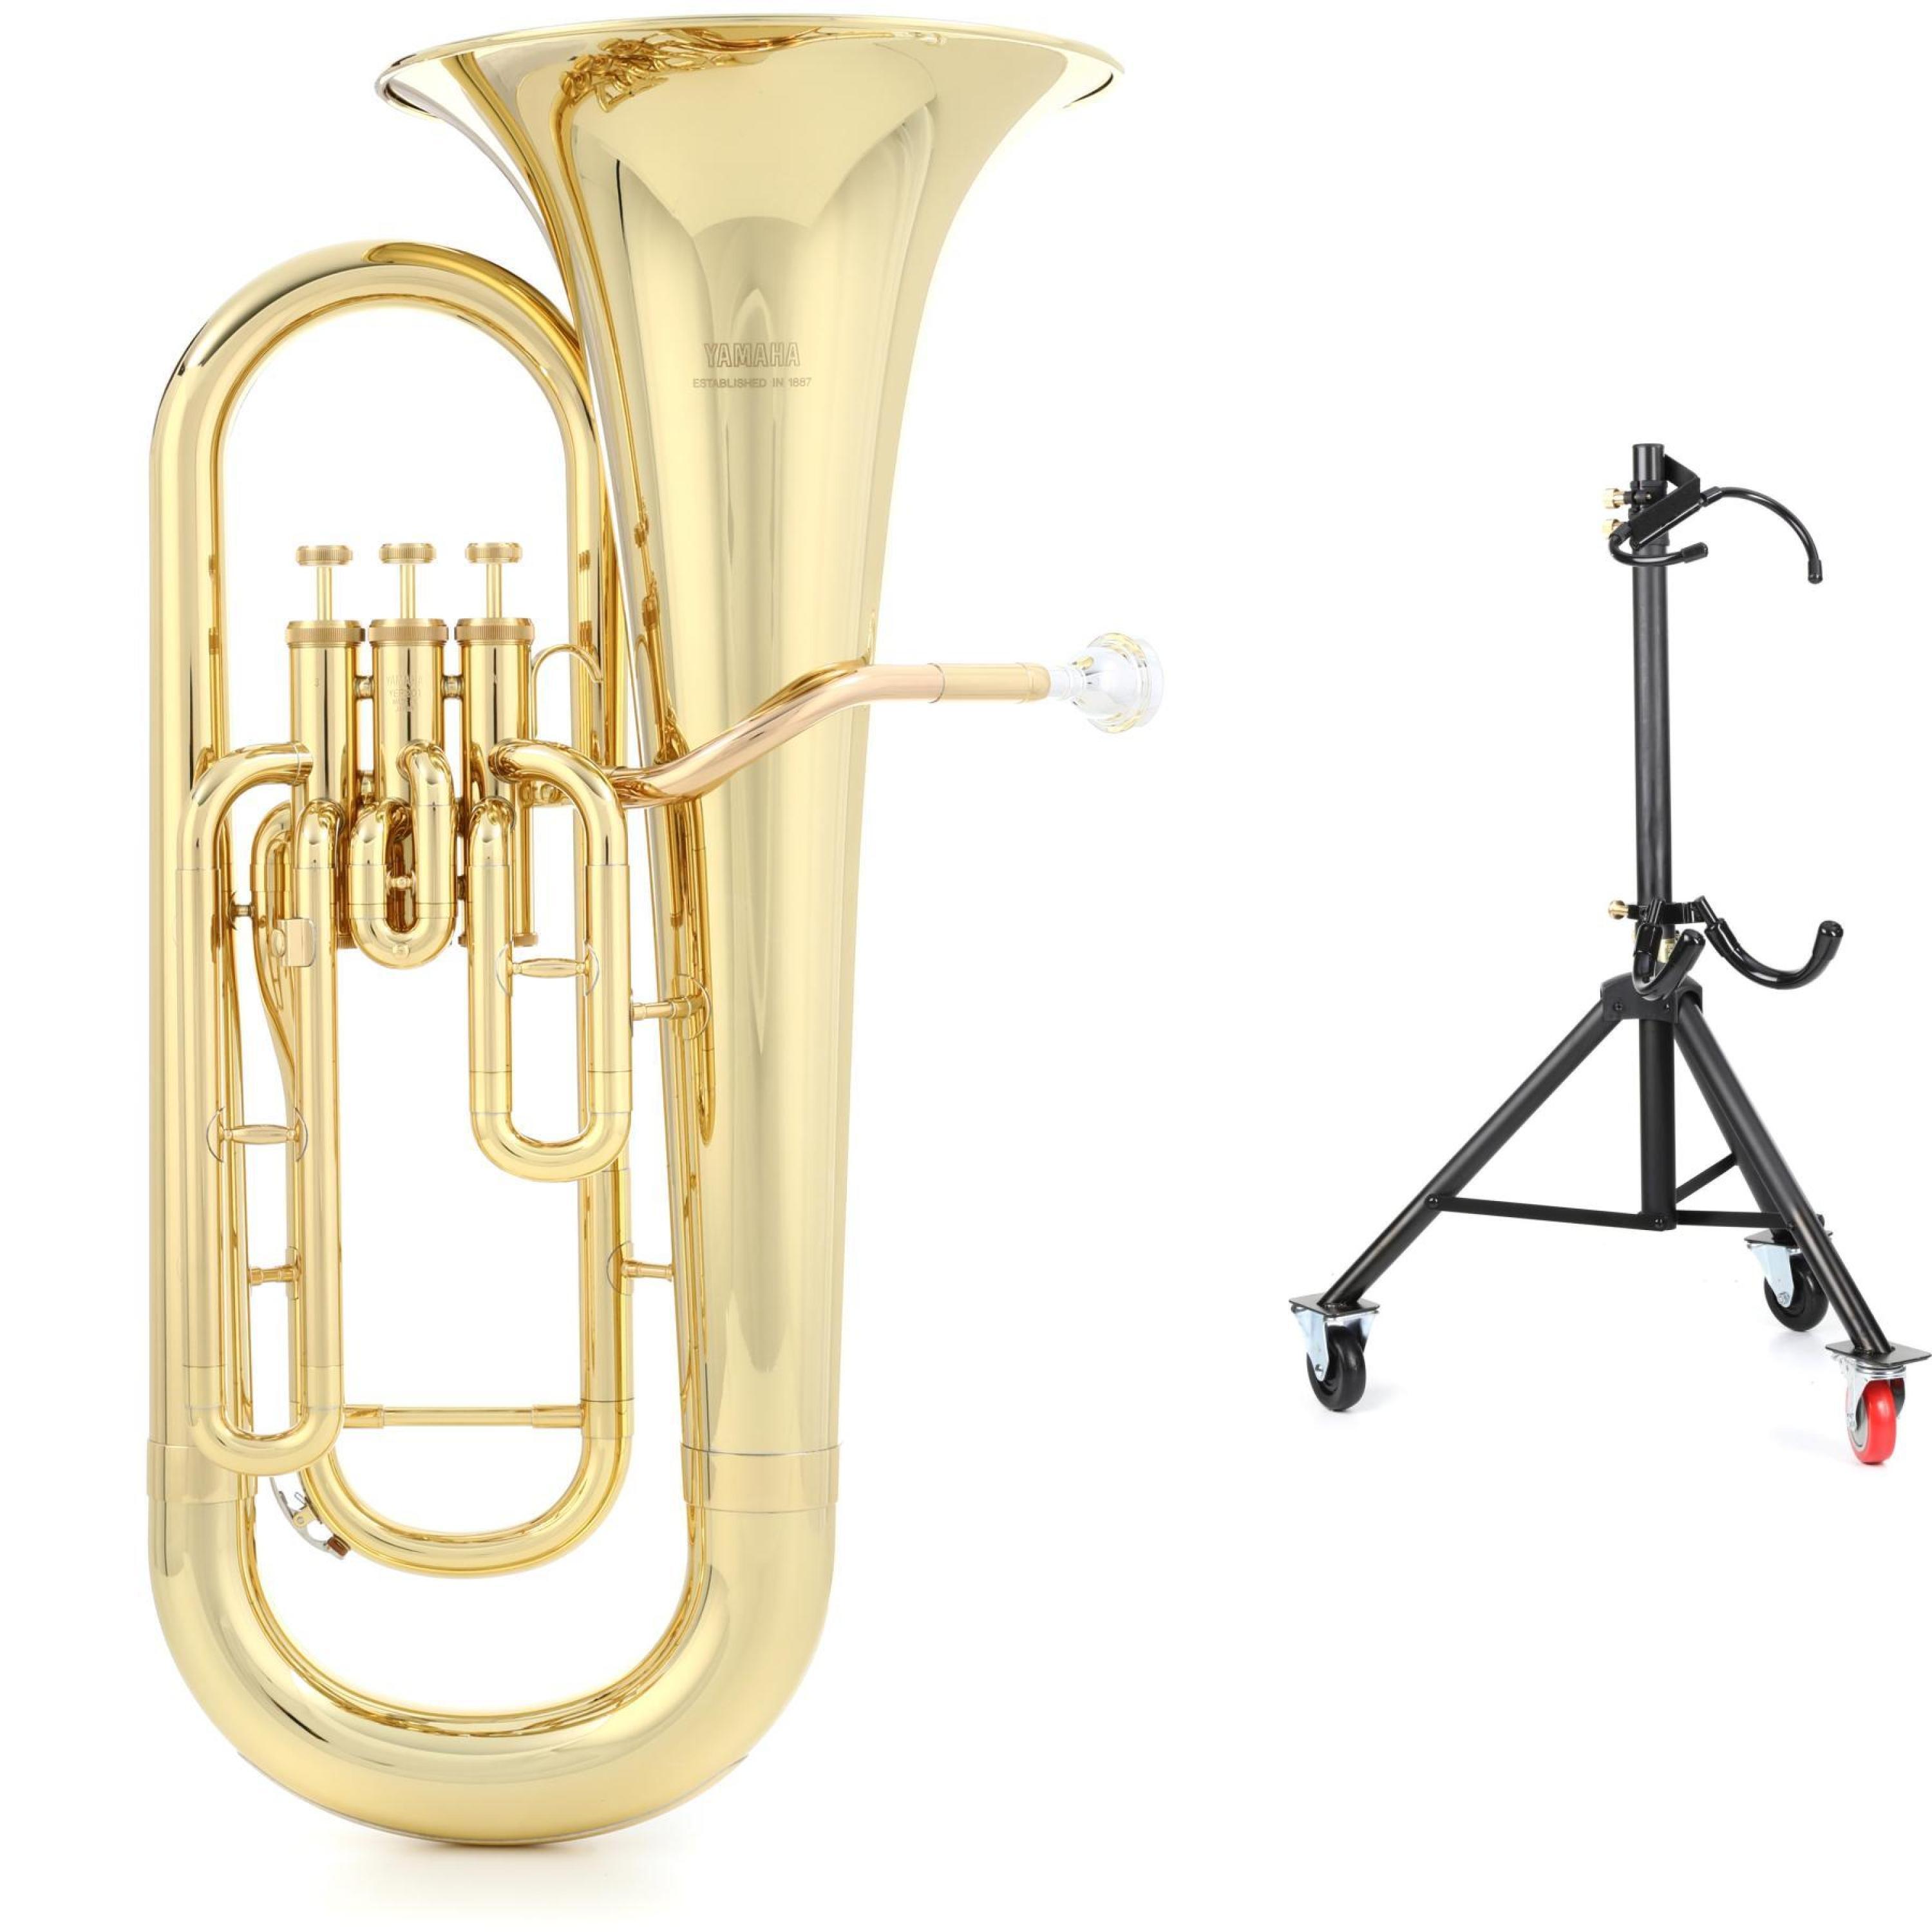 Yamaha YEP-201 3-valve Student Euphonium and Stand - Clear Lacquer